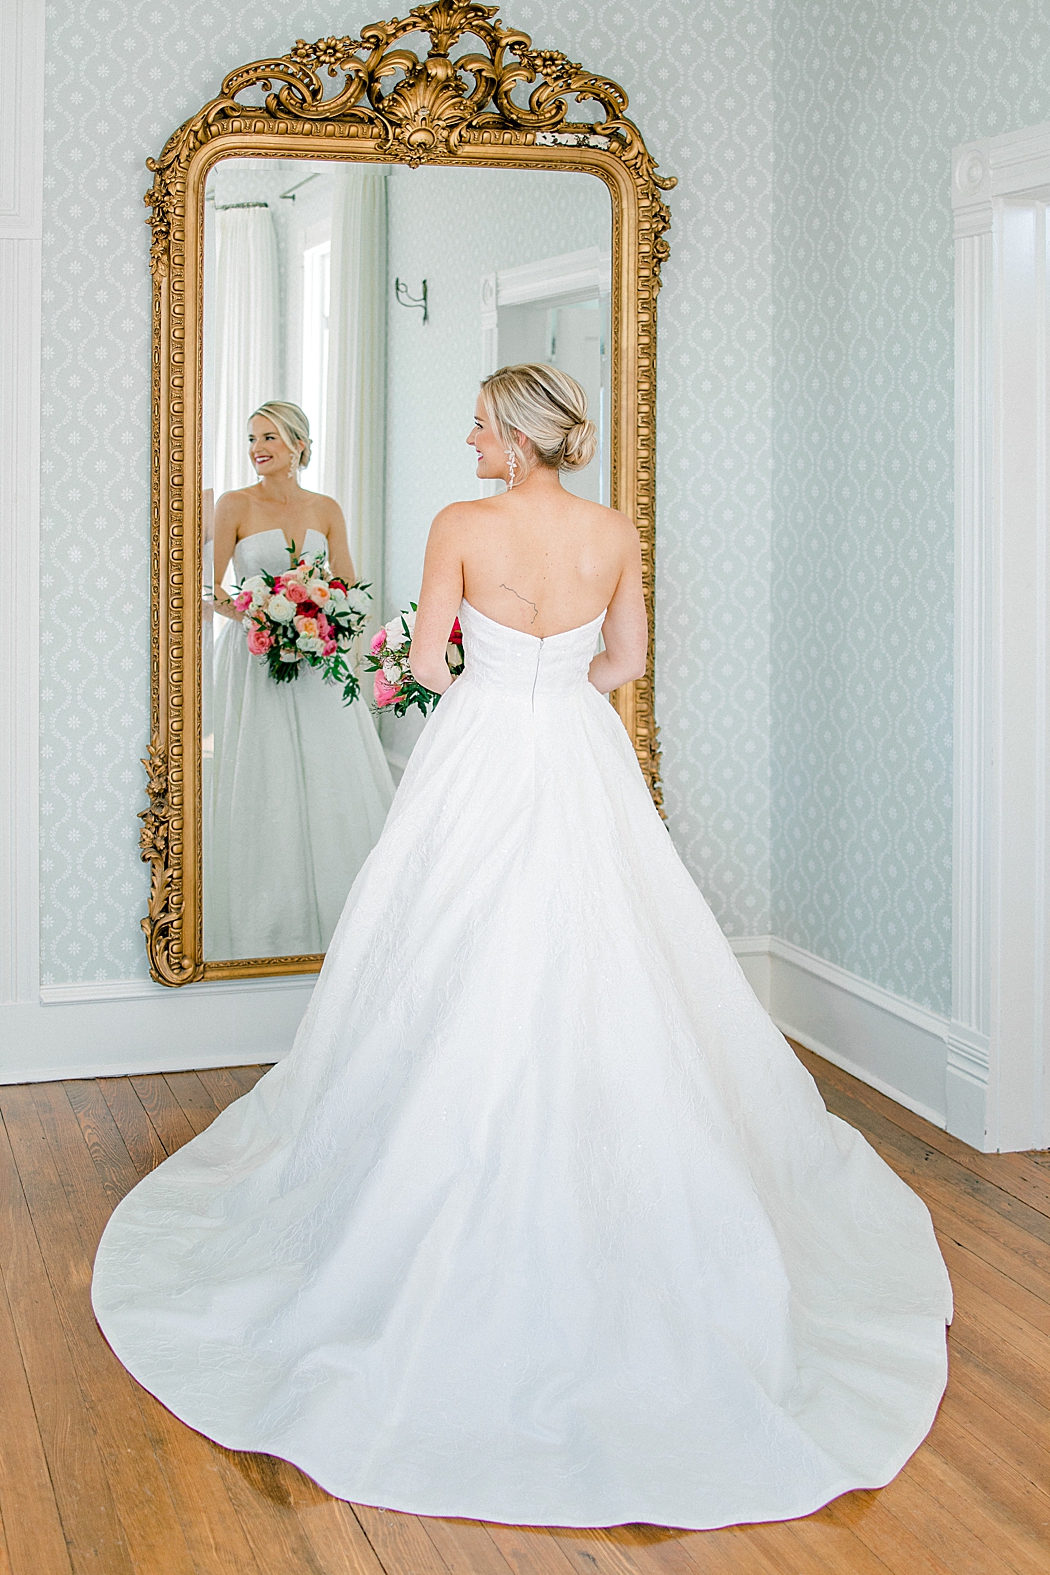 Woodbine Mansion wedding bridal photos by Allison Jeffers Photography in Round Rock Texas 0002